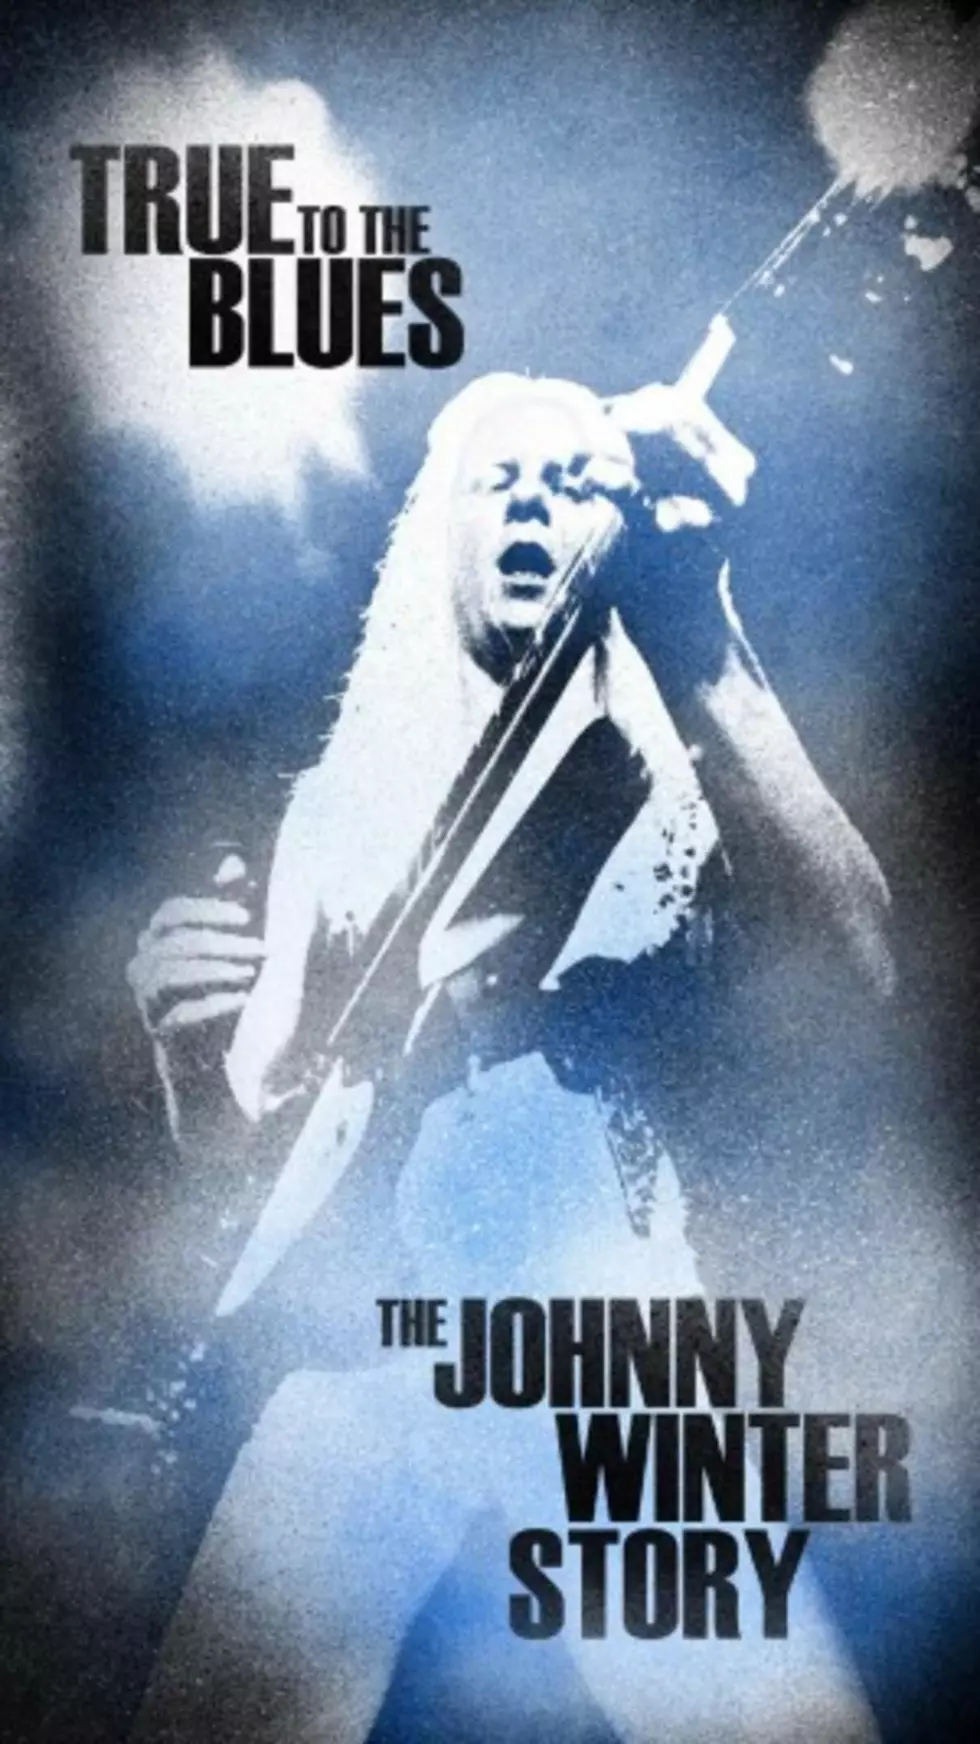 Johnny Winter, ‘True to the Blues: The Johnny Winter Story’